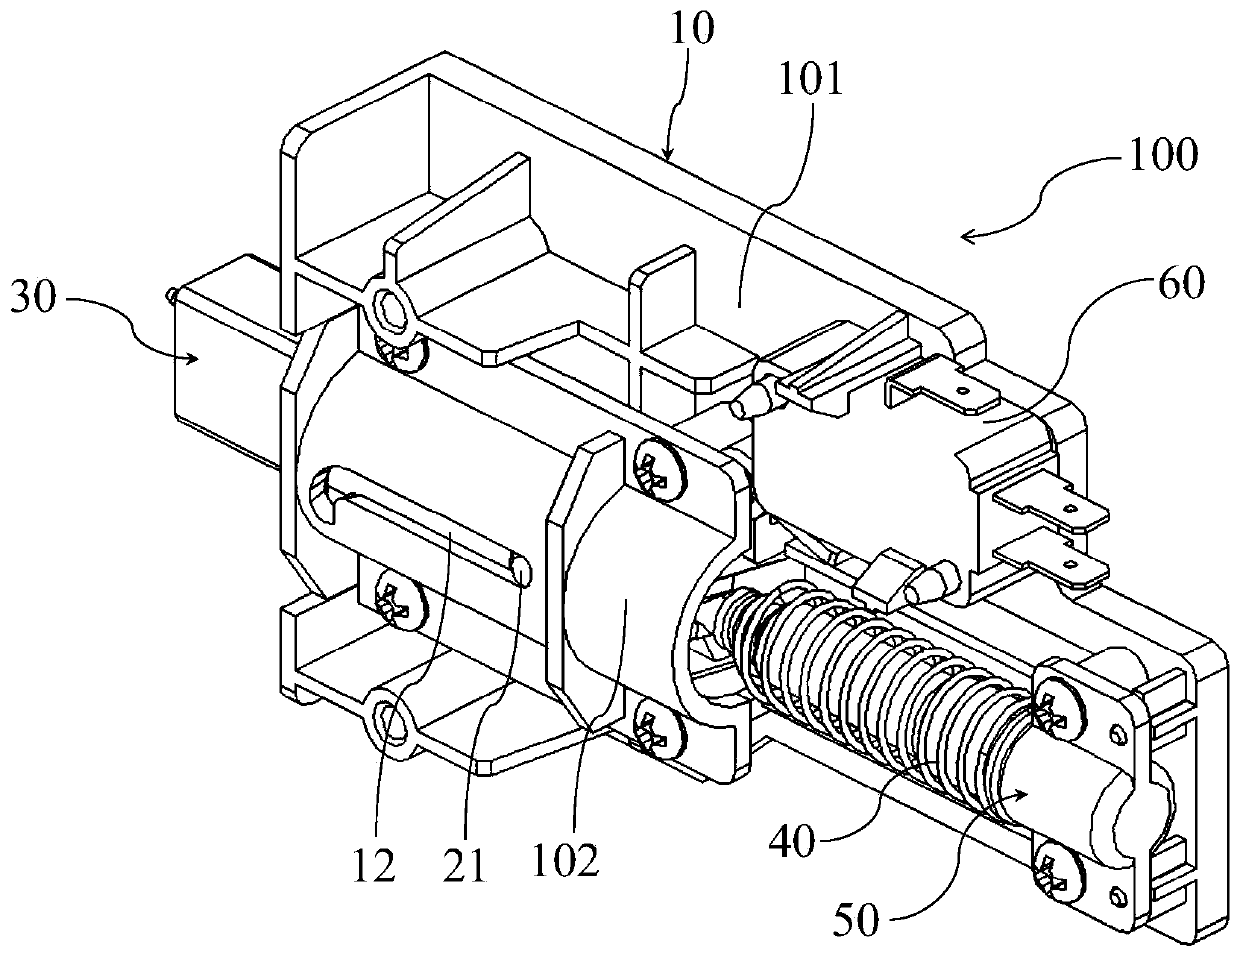 Door lock assembly and cooking electric appliance with same